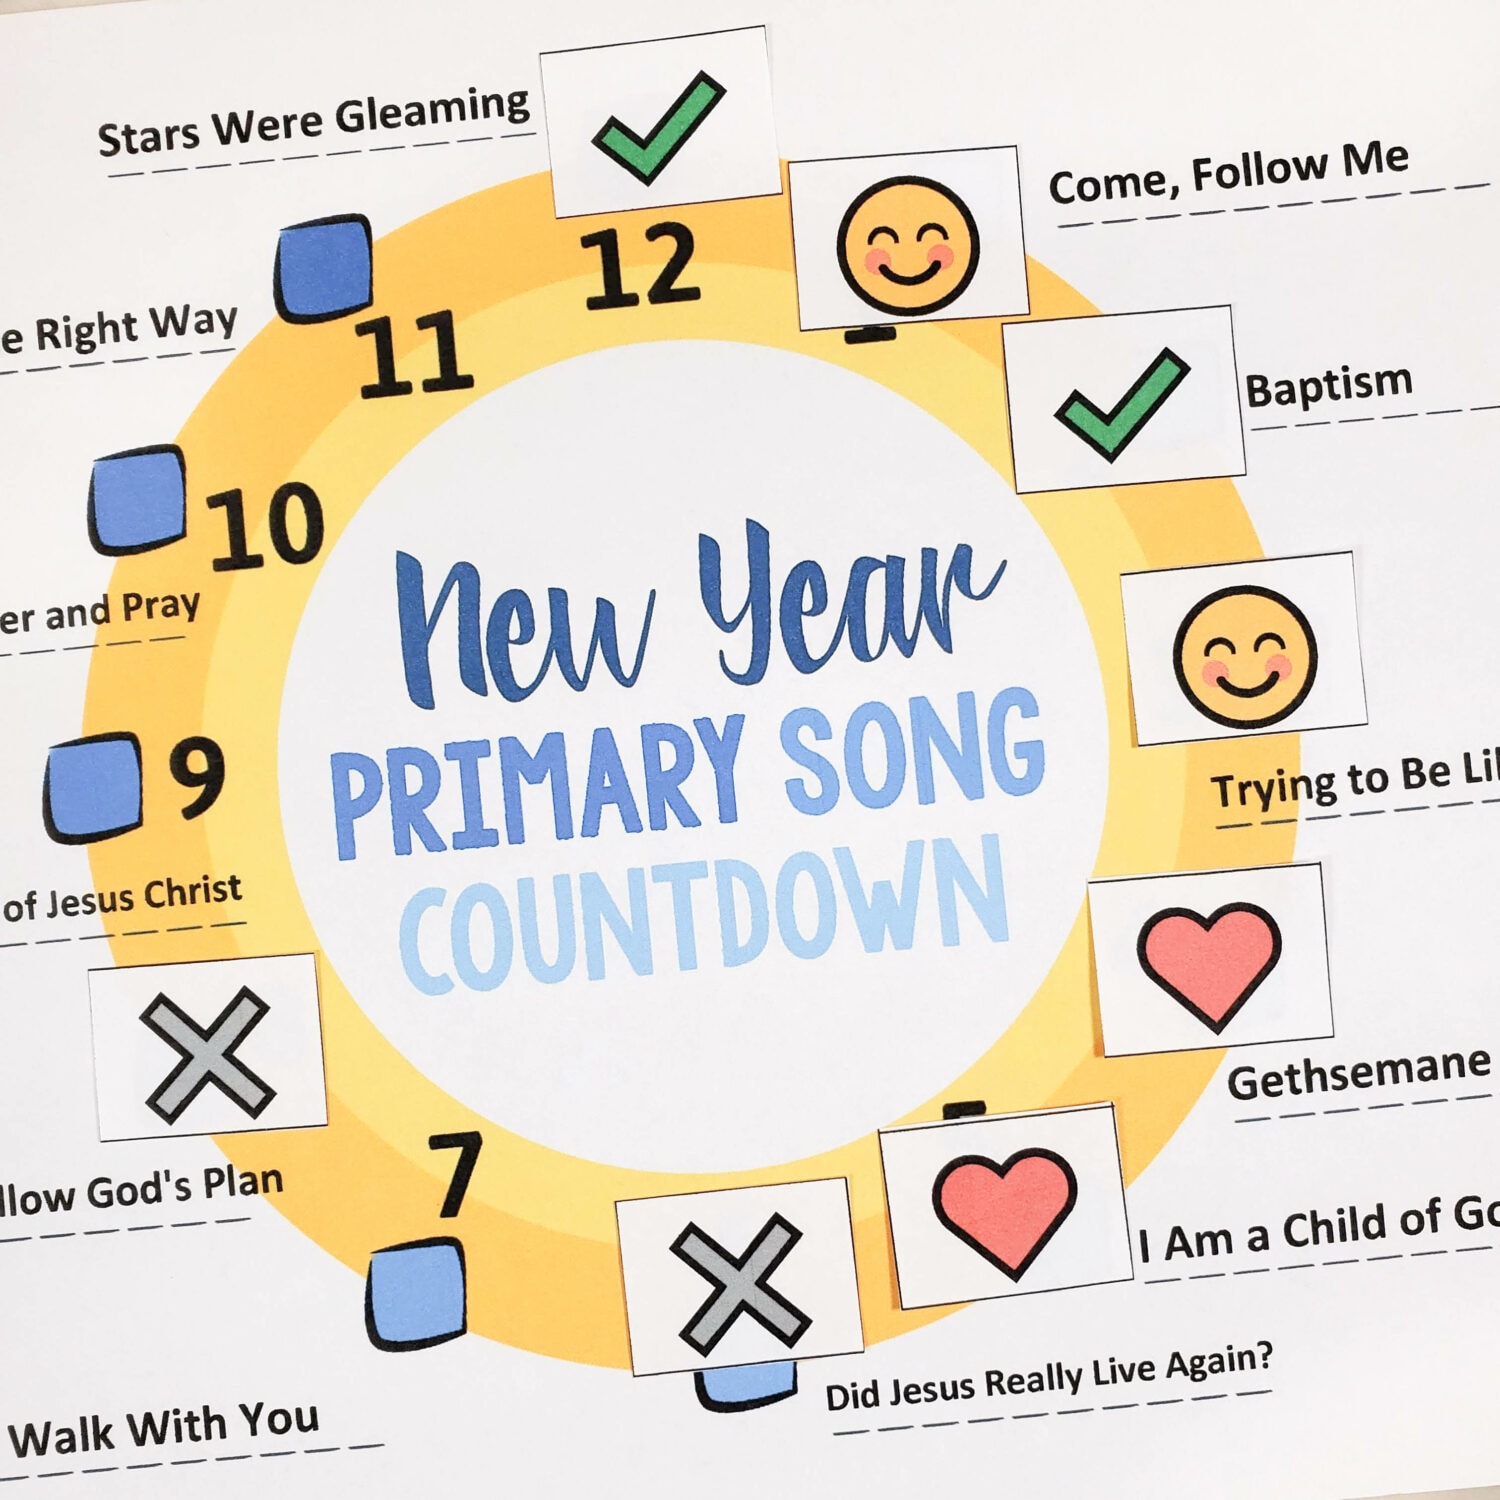 Primary Song Check-in - Use this cute printable to introduce your Primary Songs for the new year or review all your songs to see how well the kids know them! Use it as a big poster or individual checklist trackers for your song progress. Plus, a cute clock countdown printable for New Years singing time! Free printable song helps for LDS Primary Music Leaders.